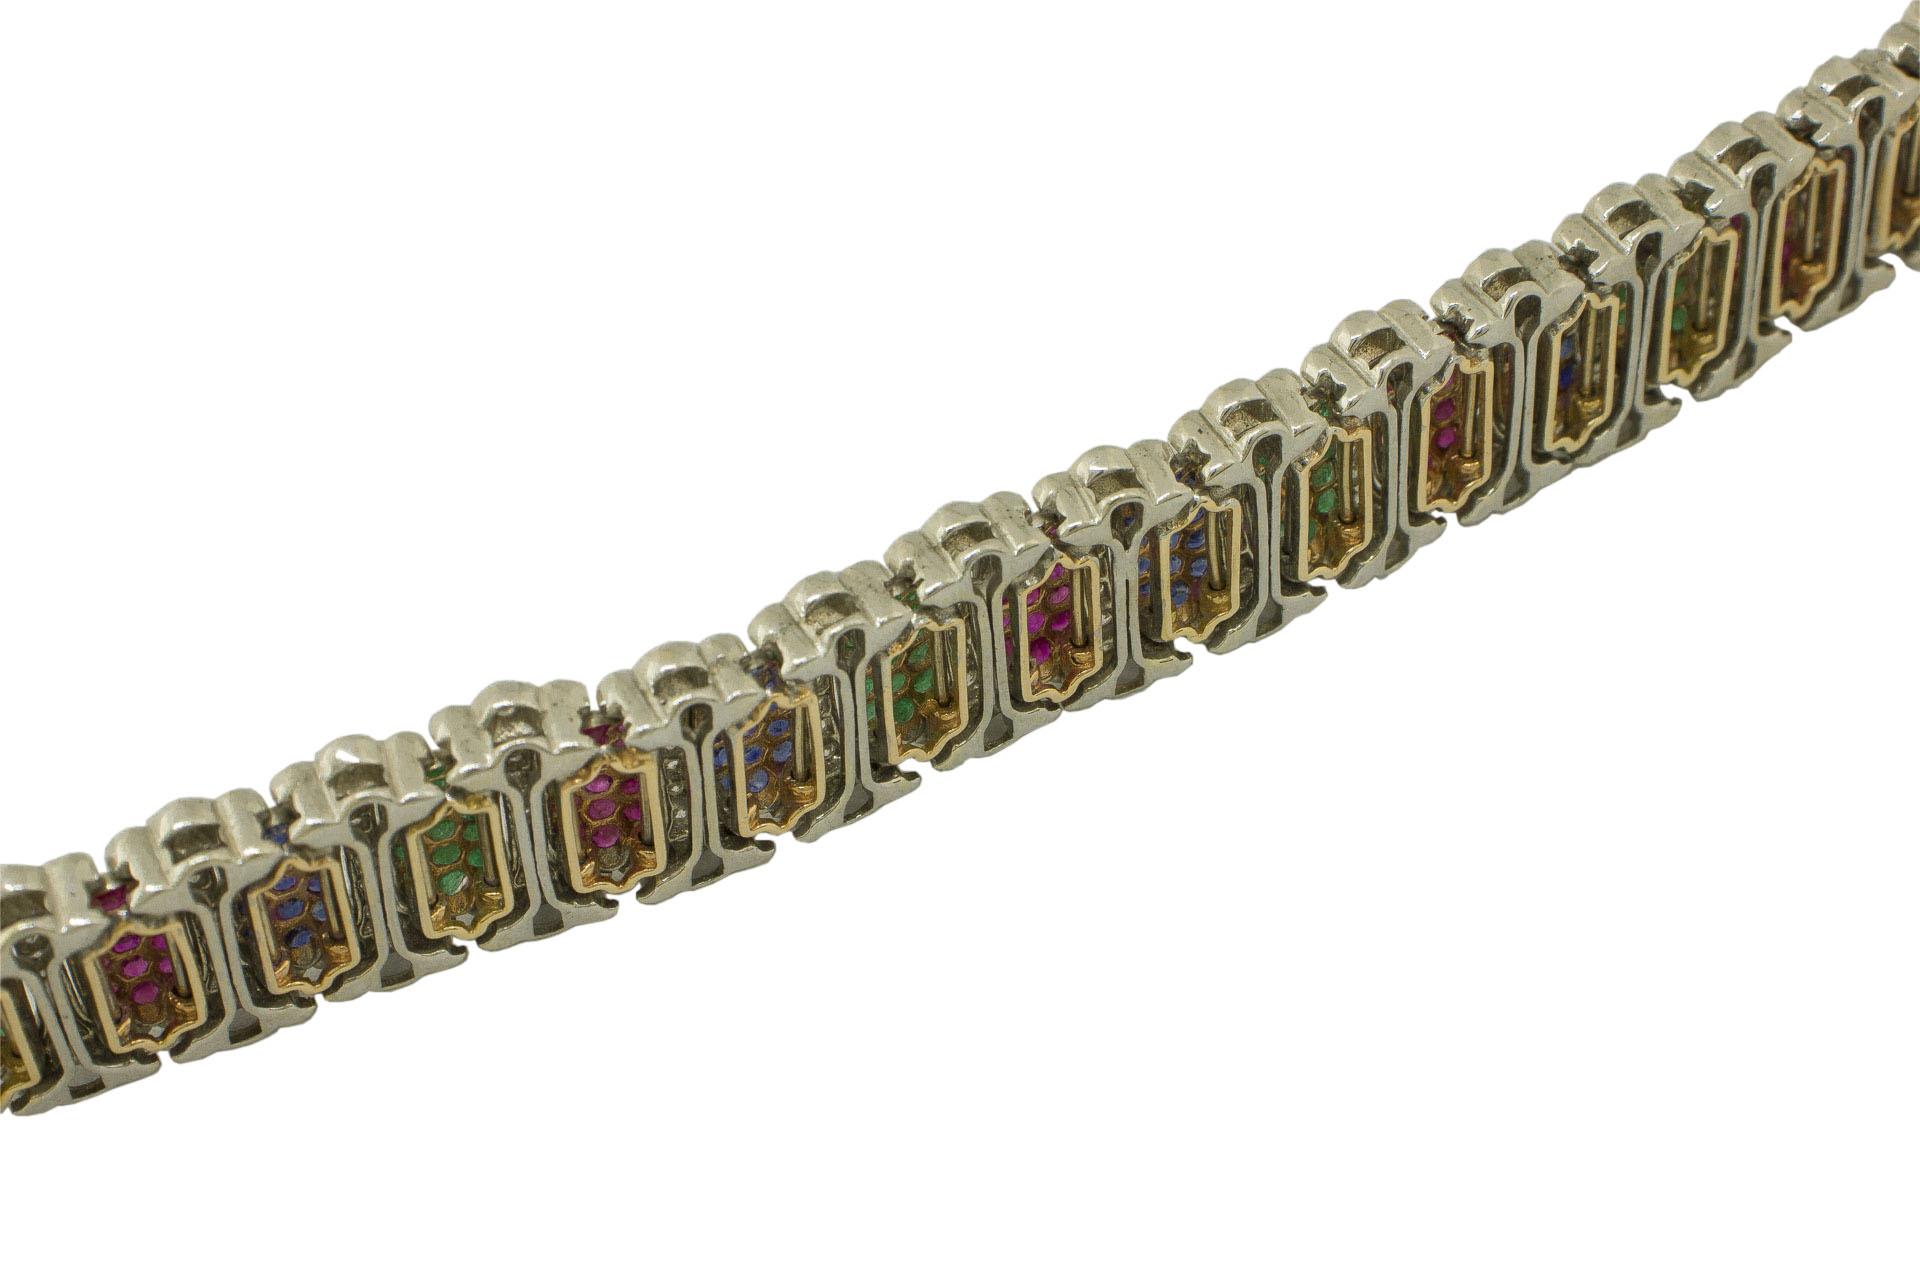 Brilliant Cut White Diamonds Rubies Emeralds Blue Sapphires White and Rose Gold Link Bracelet For Sale